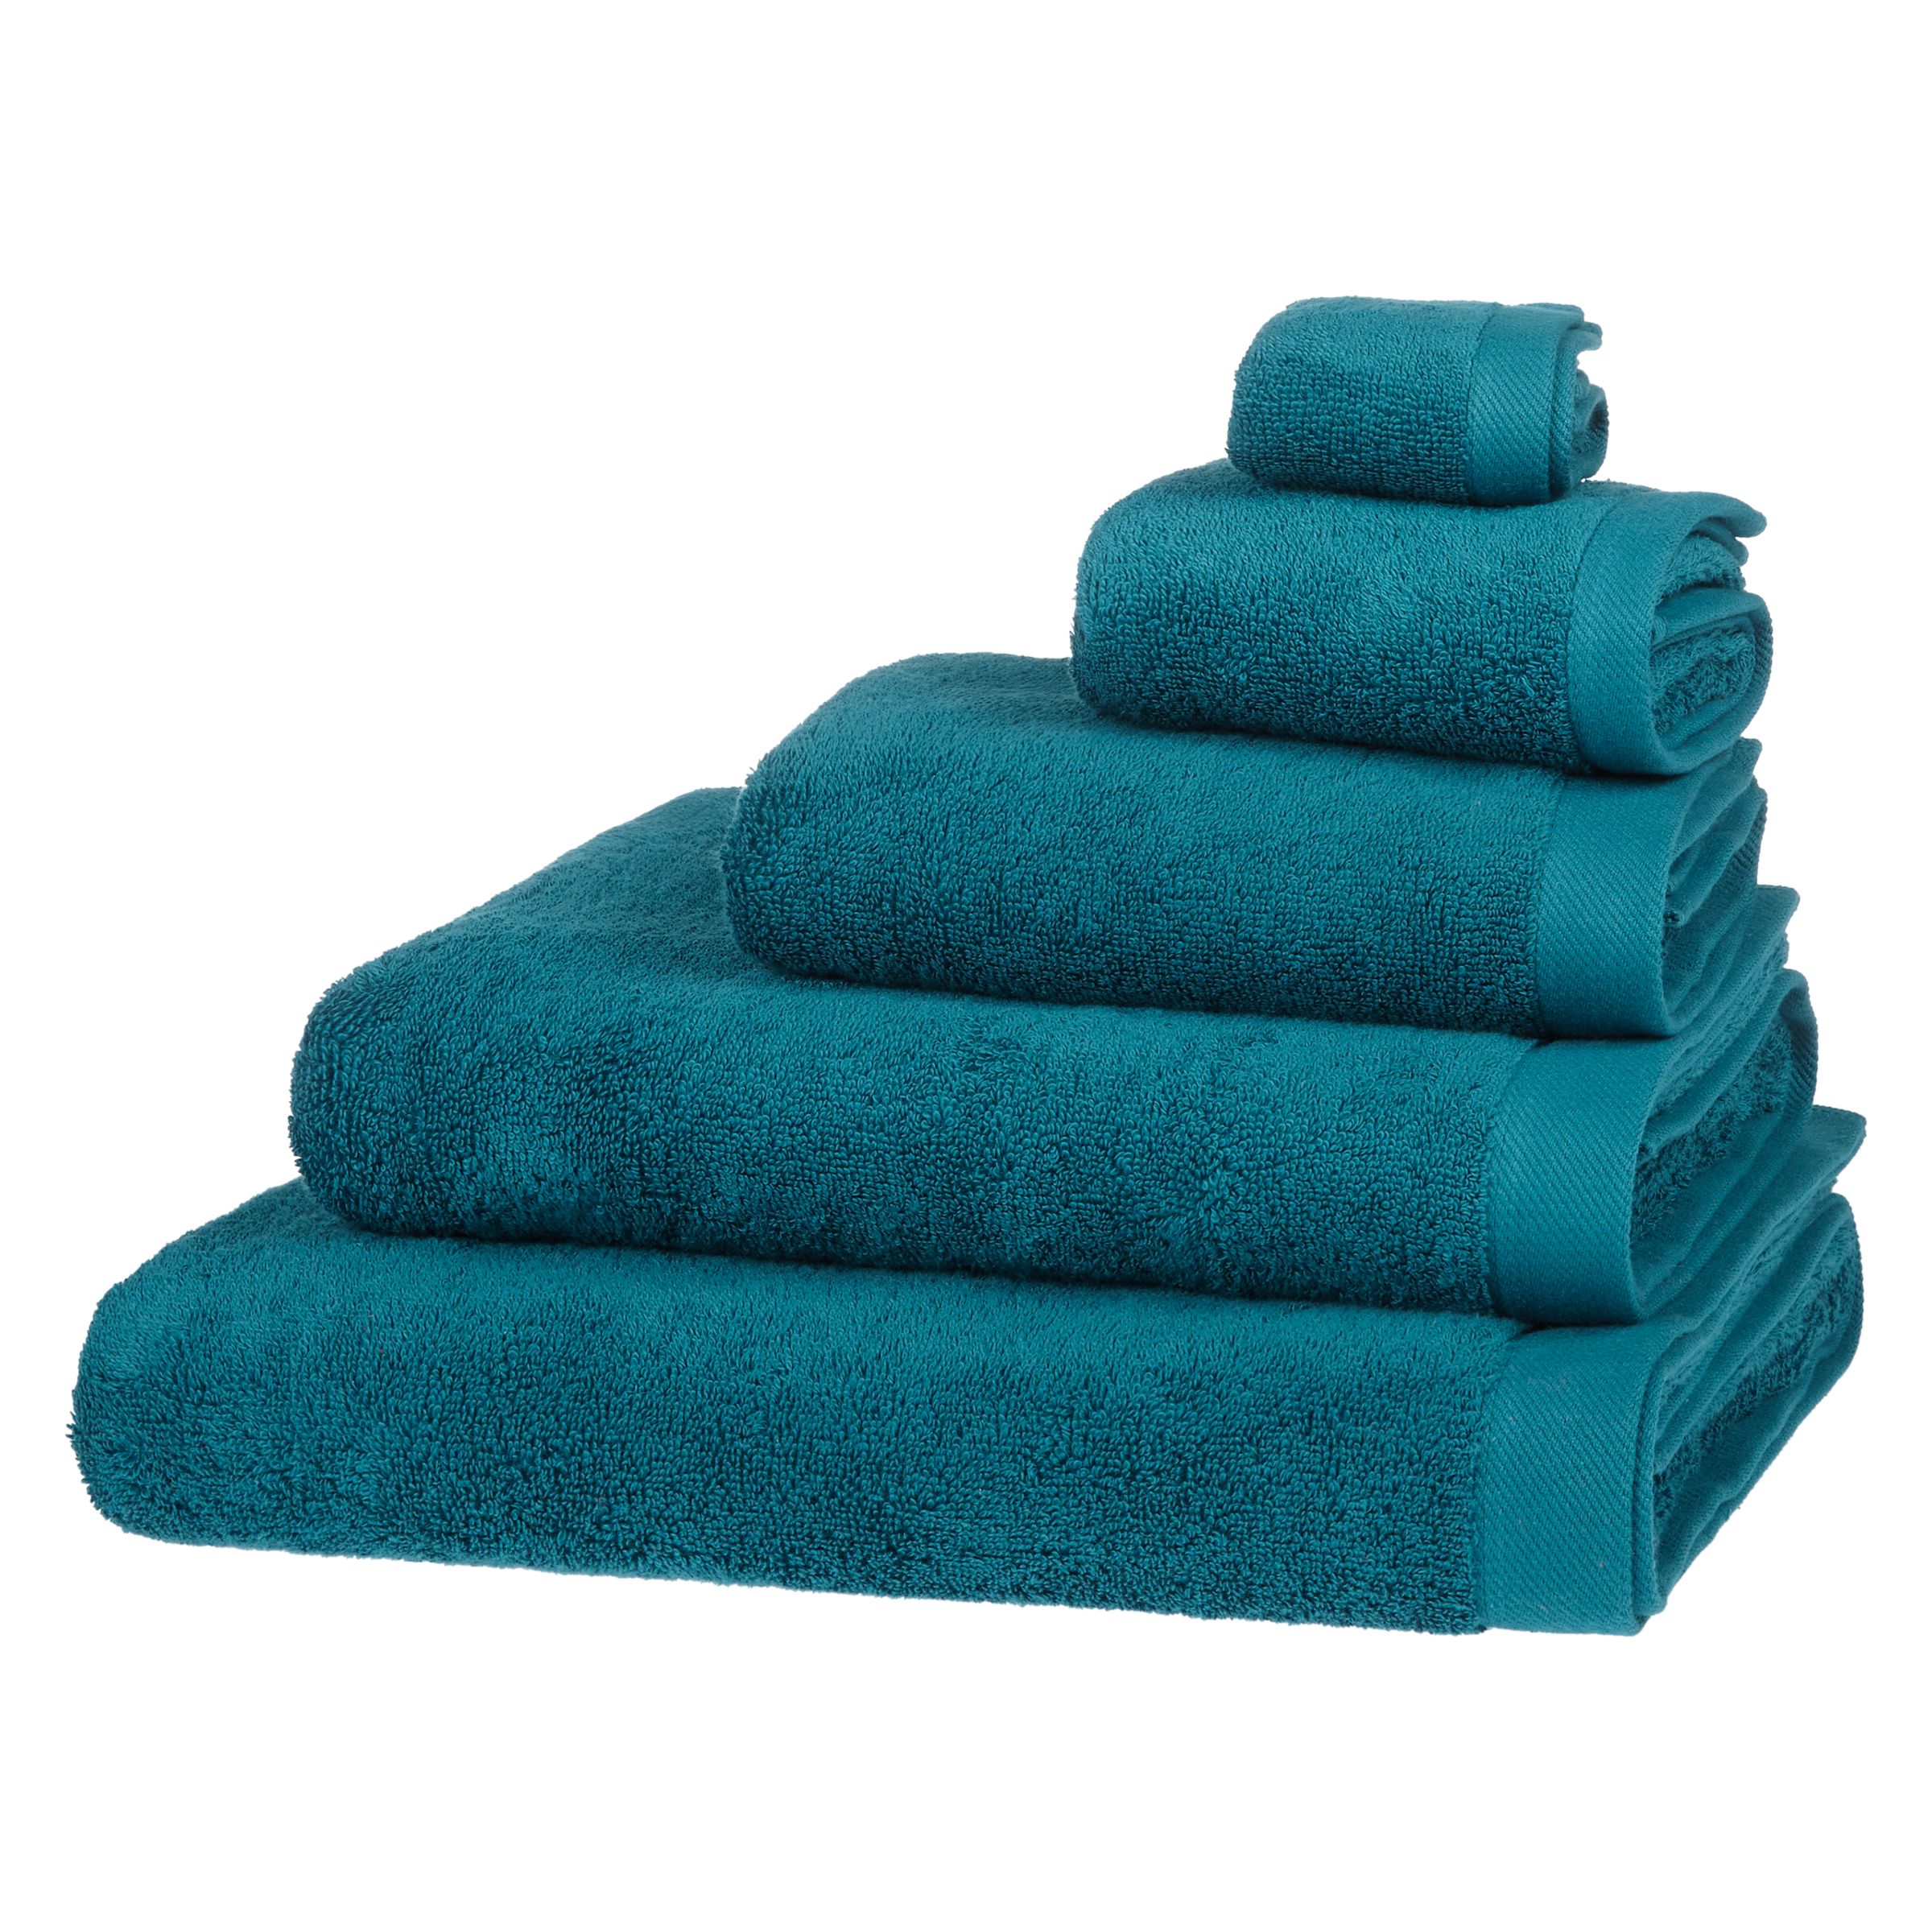 House by John Lewis Towels